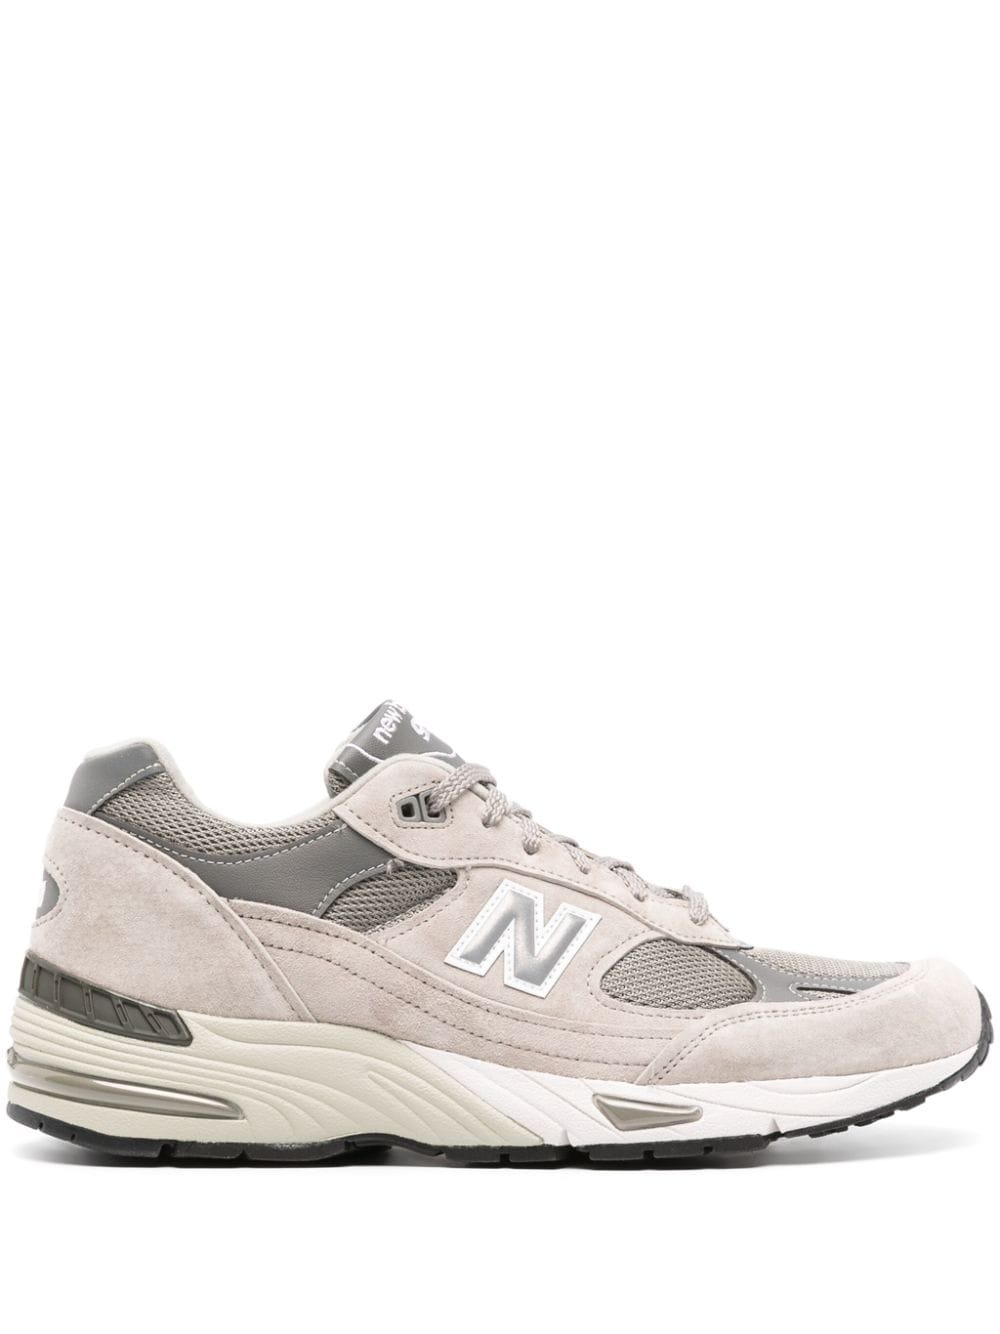 New Balance Made in UK 991 panelled sneakers - Grey von New Balance